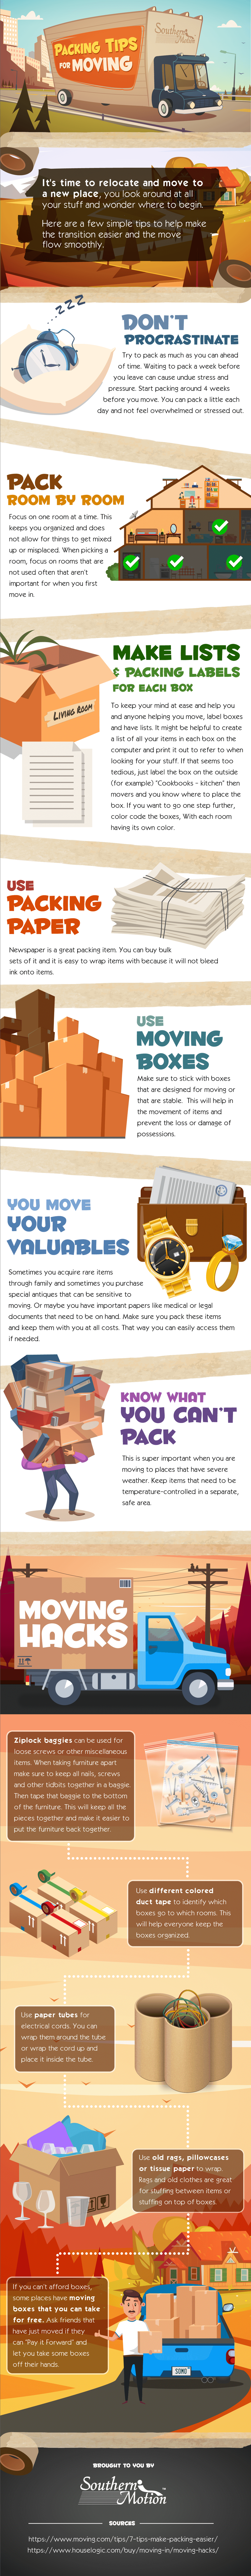 Packing tips for moving [Infographic]